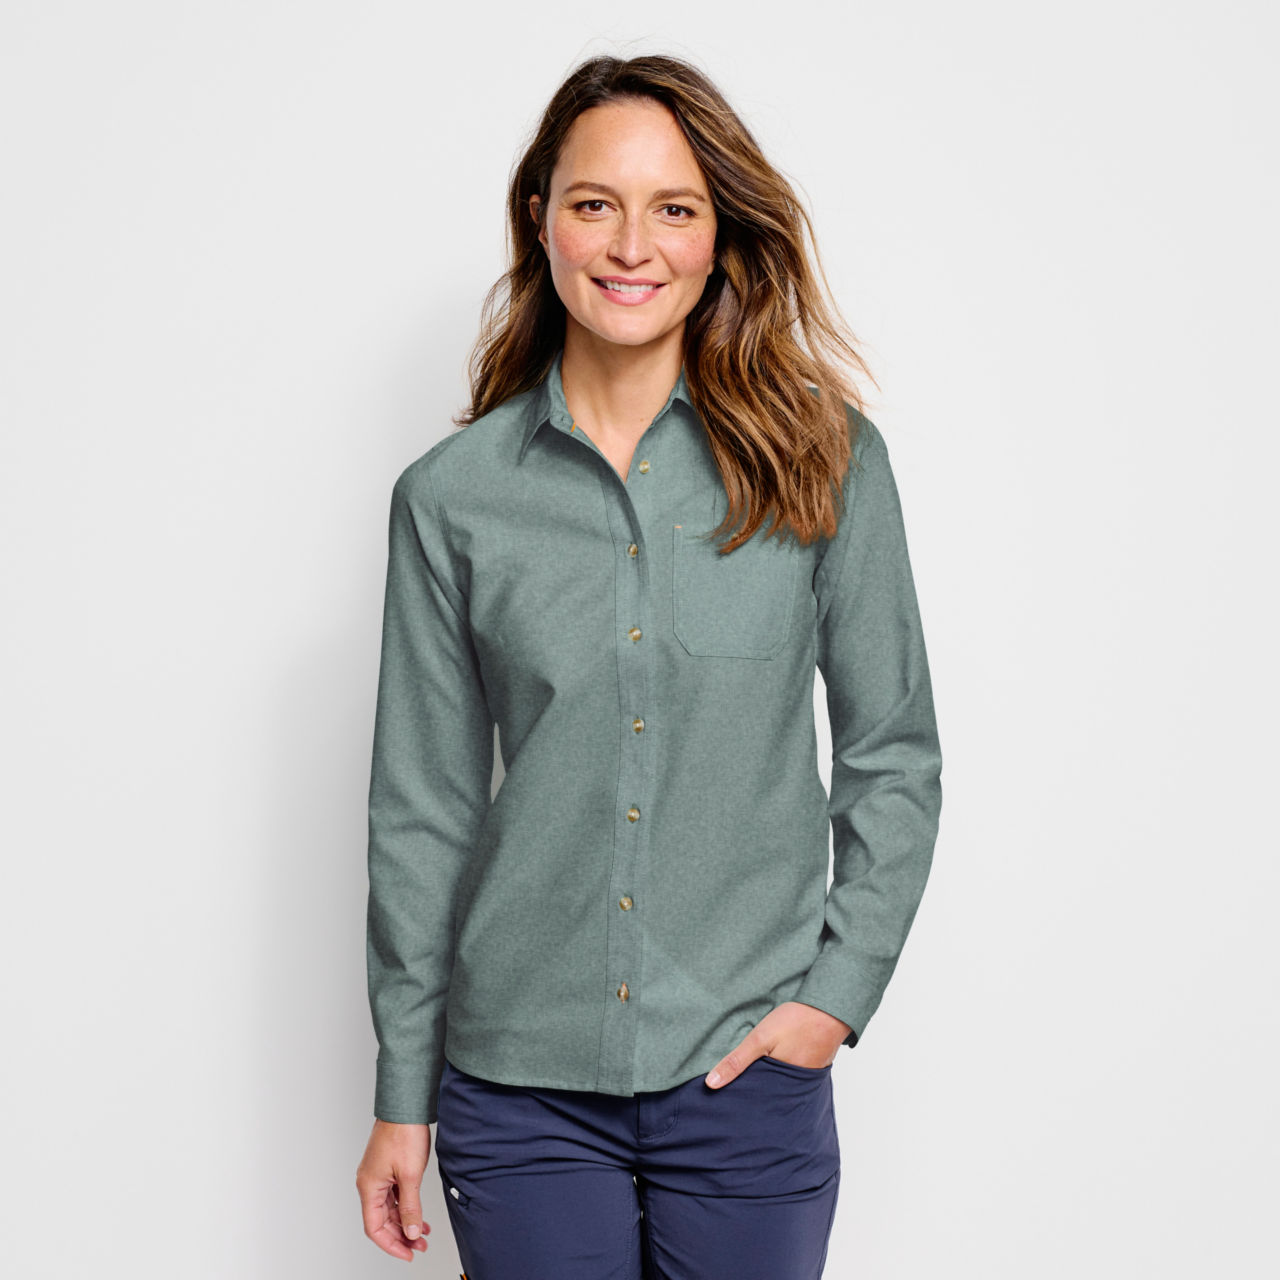 Women’s Long-Sleeved Tech Chambray Work Shirt - FOREST image number 0